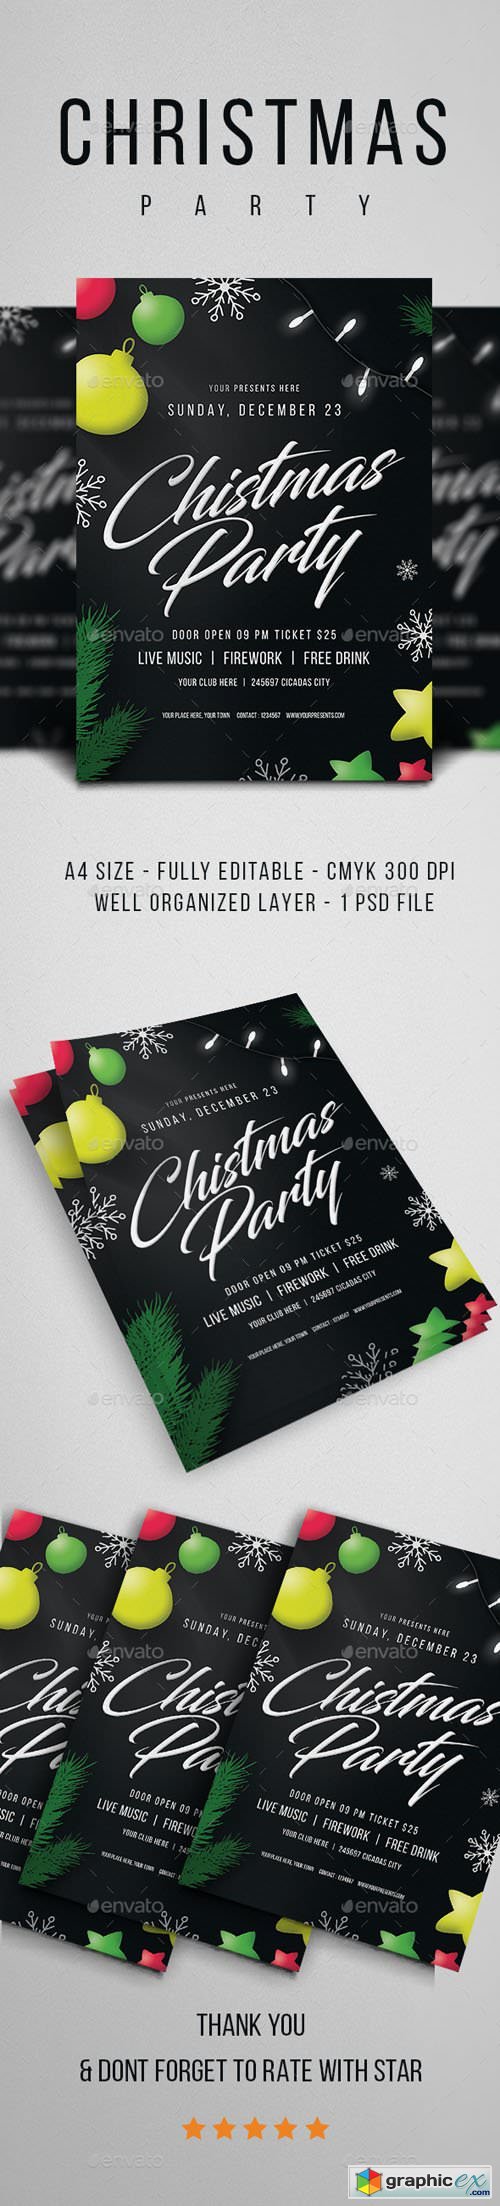 Christmas Party Flyer Vol.4